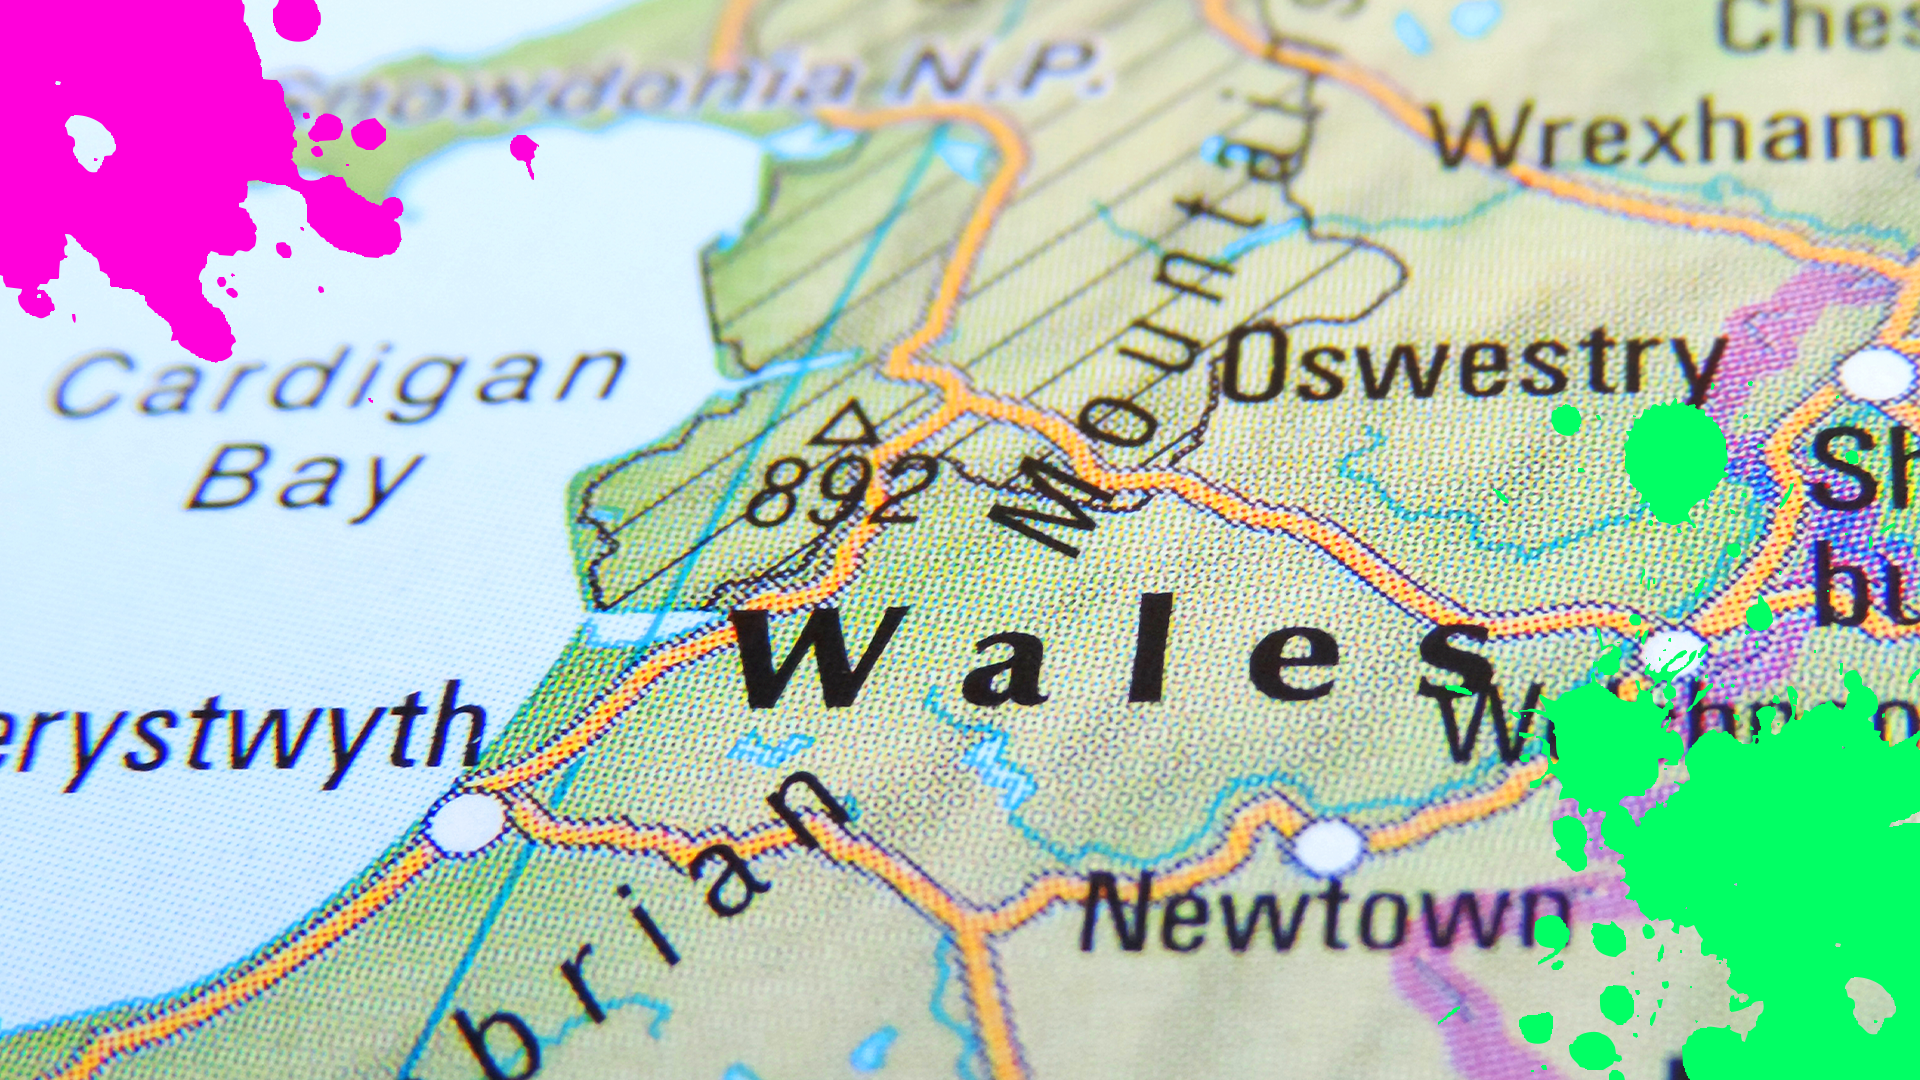 Map of Wales with colourful splats